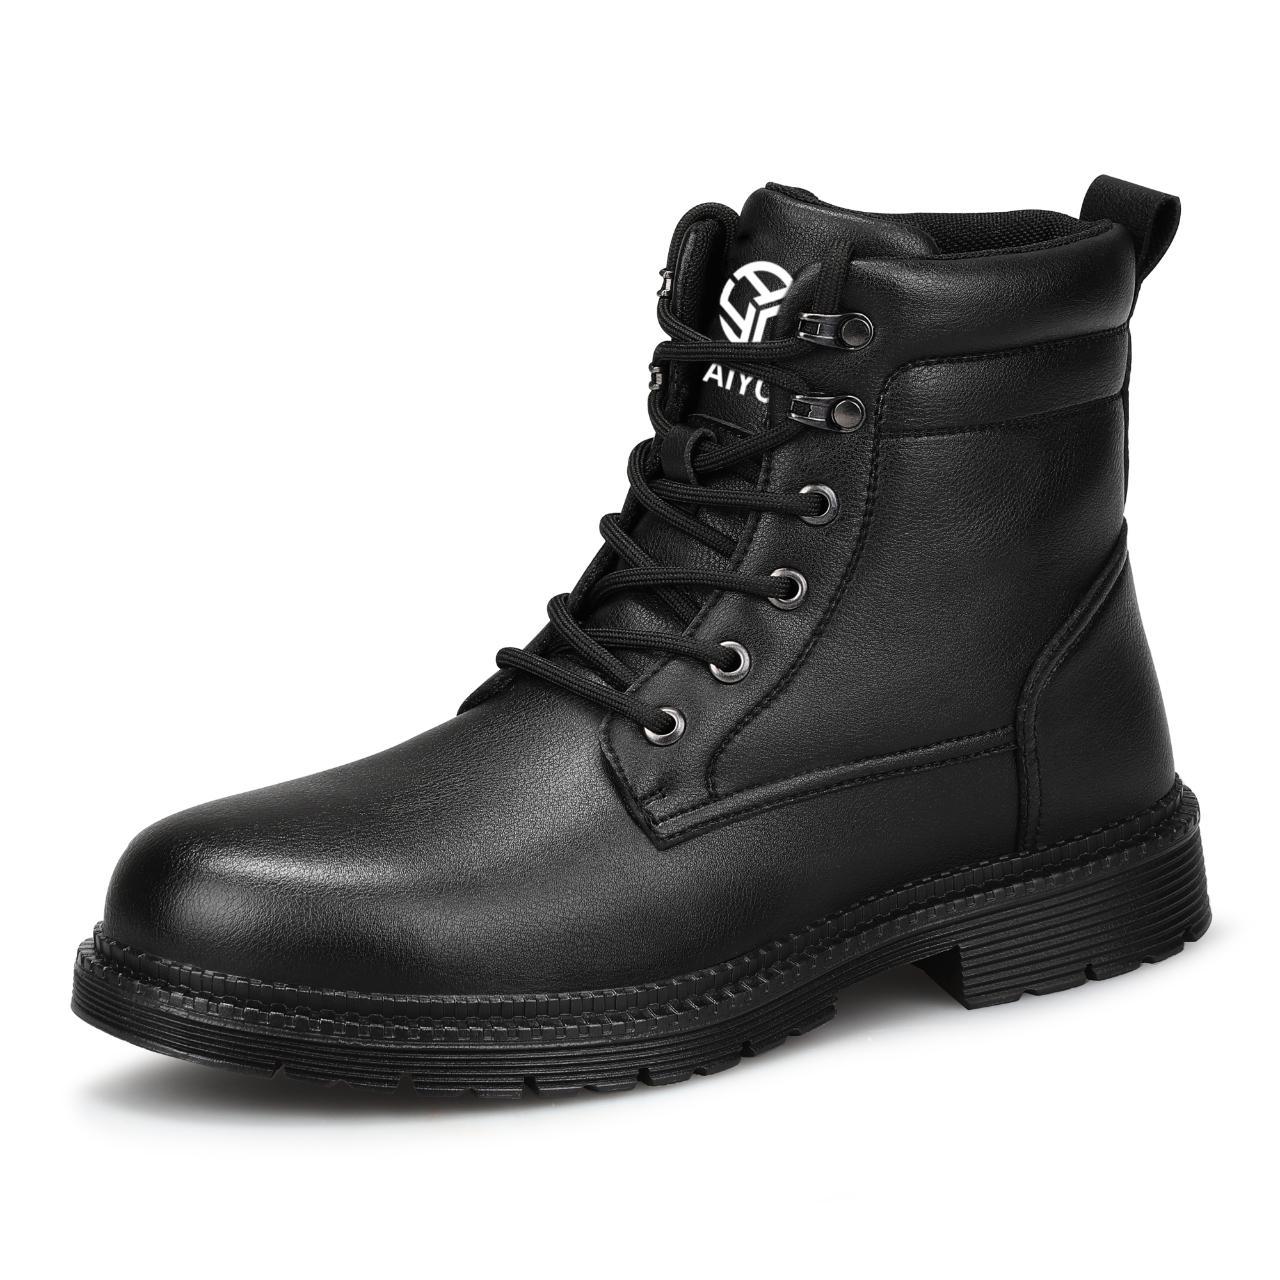 Panther Men's Safety Boot Durable Heavy Duty Steel... - Depop